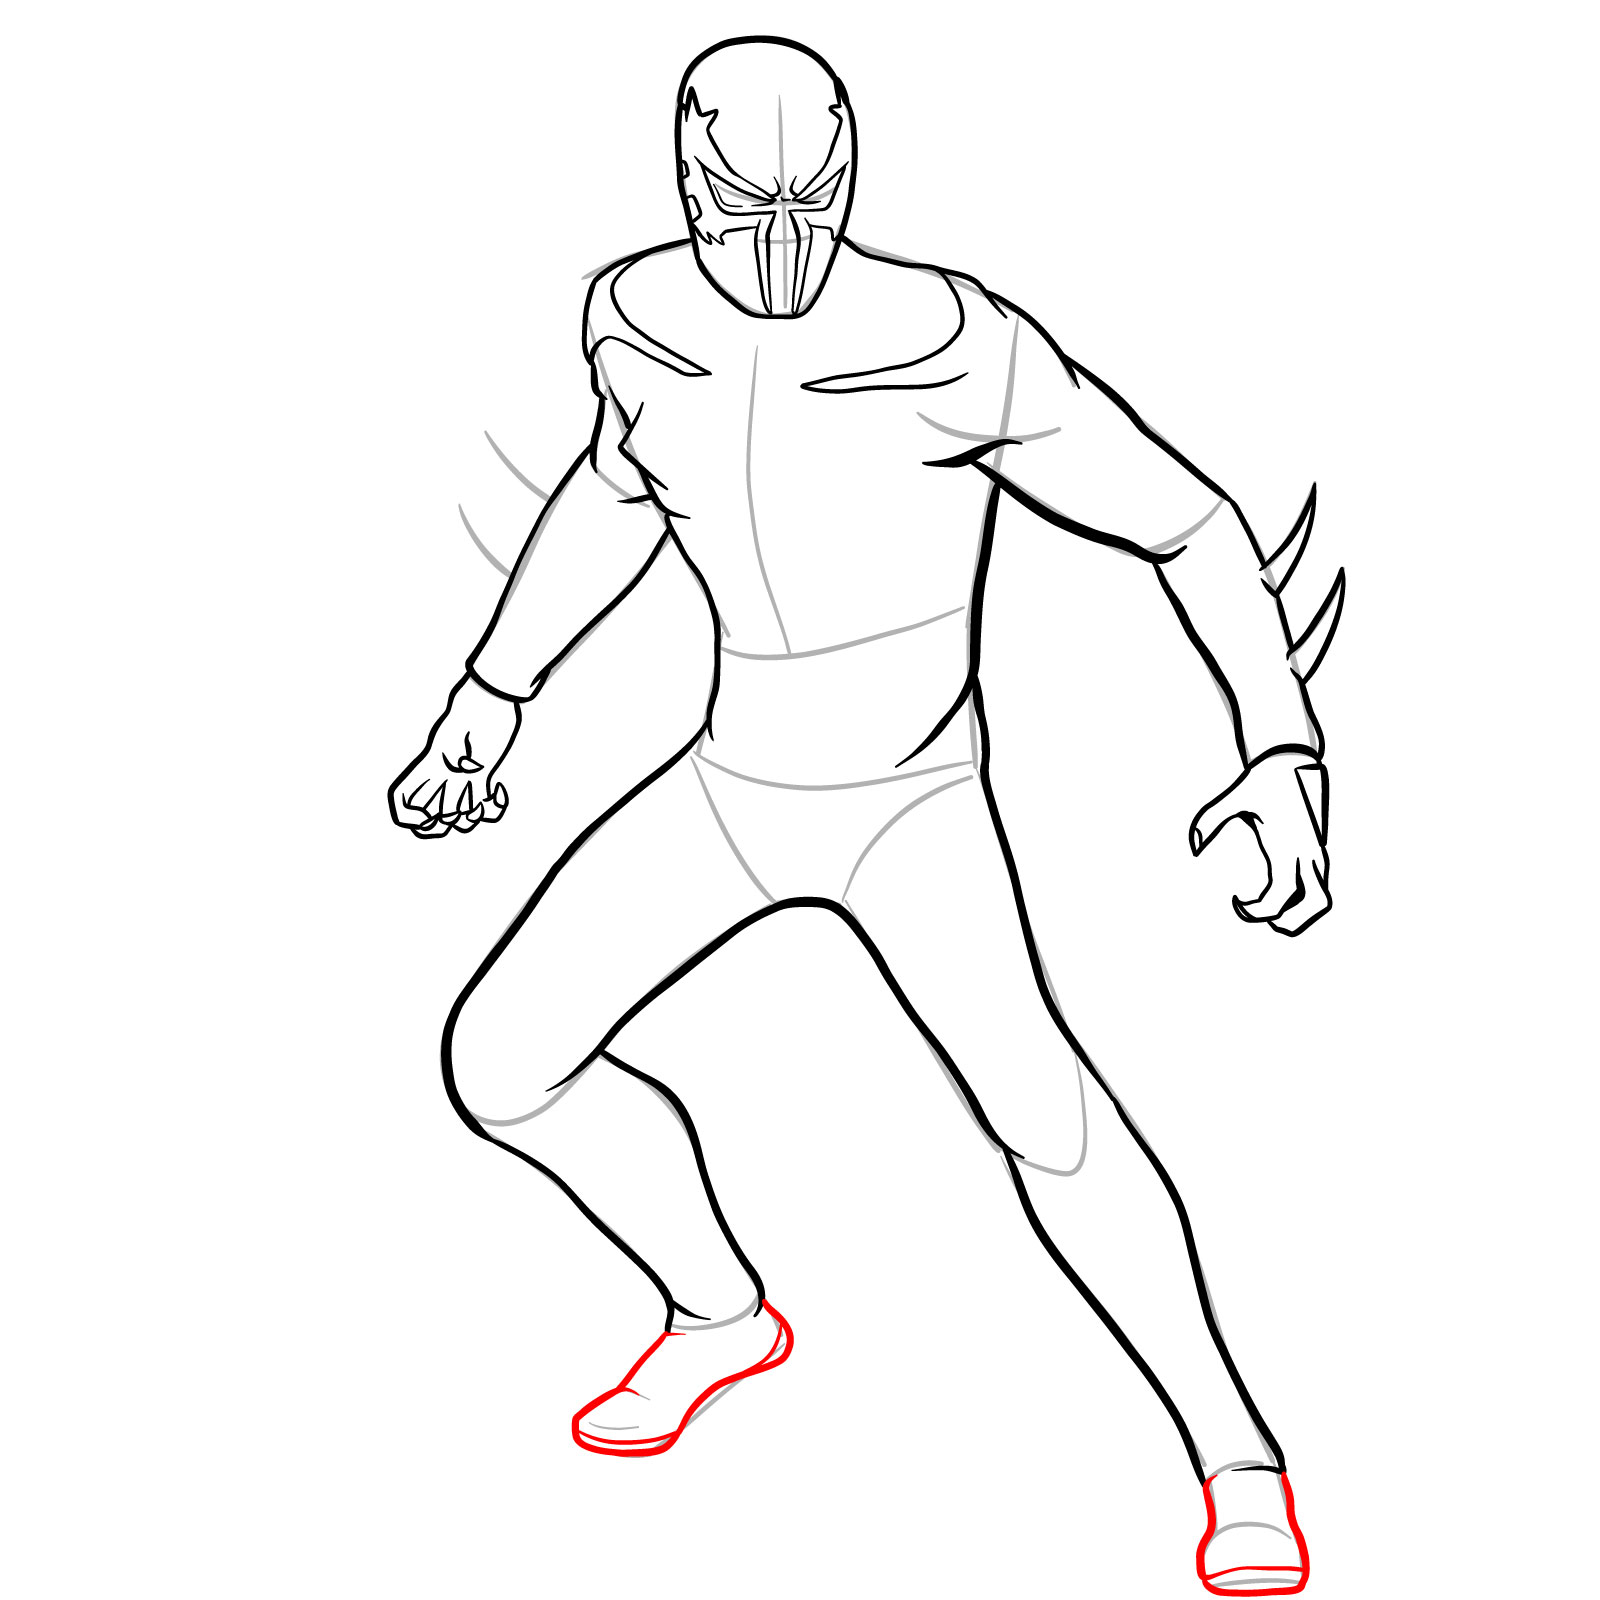 How to draw Spider-Man 2099 - step 26